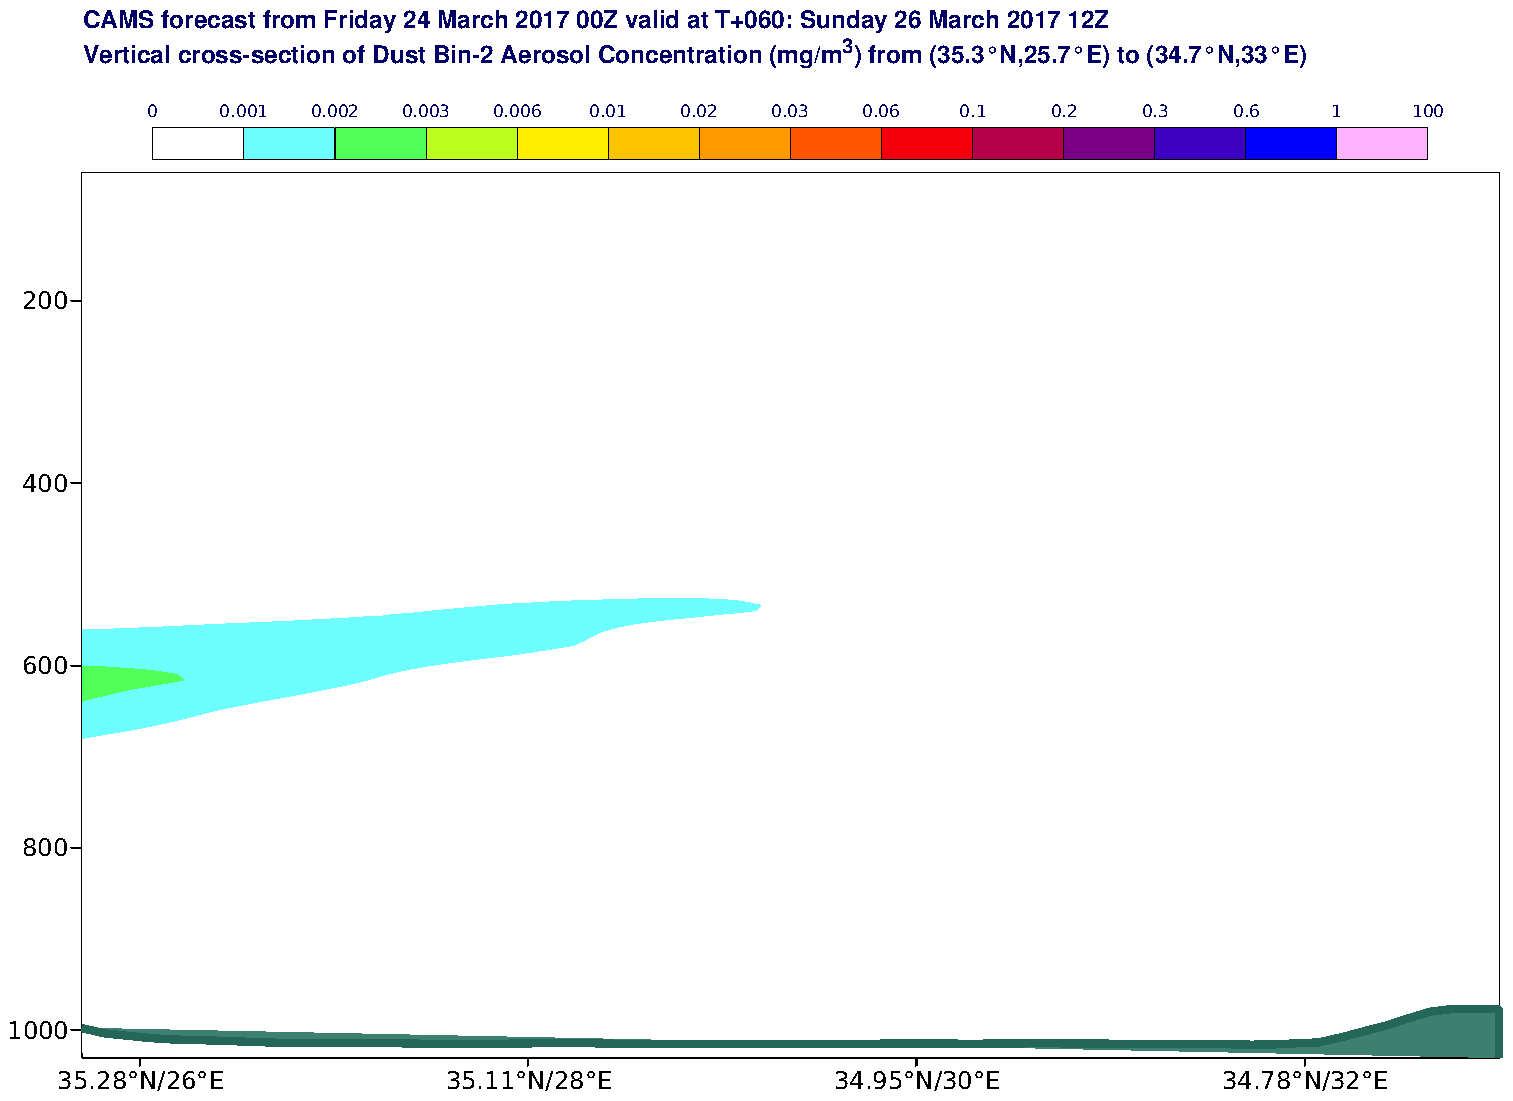 Vertical cross-section of Dust Bin-2 Aerosol Concentration (mg/m3) valid at T60 - 2017-03-26 12:00